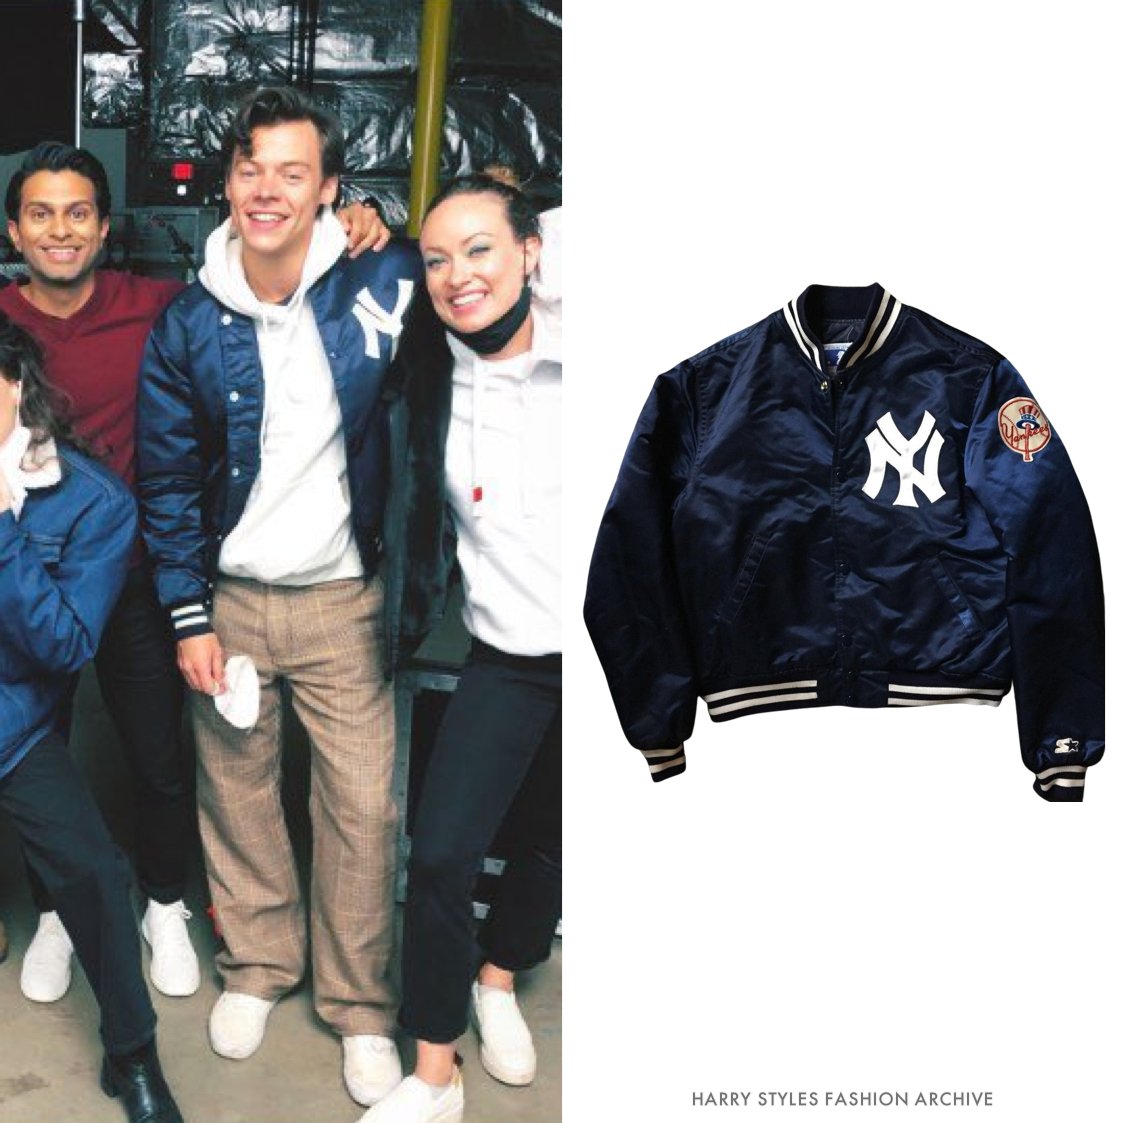 Harry Styles Fashion Archive on X: Harry wore a vintage @Yankees